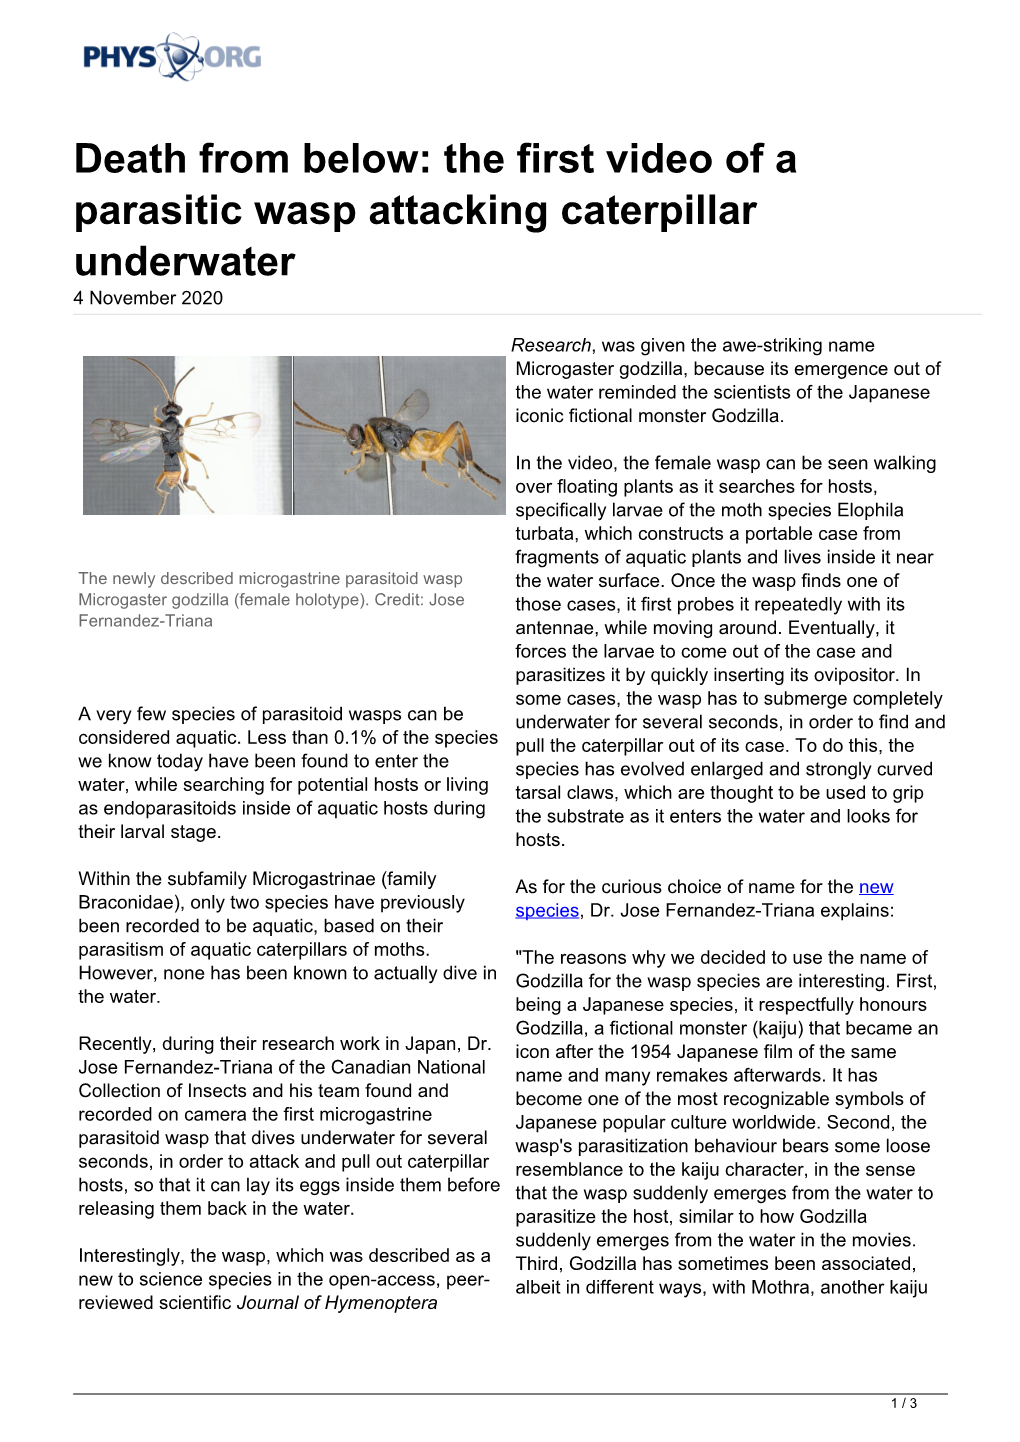 Death from Below: the First Video of a Parasitic Wasp Attacking Caterpillar Underwater 4 November 2020